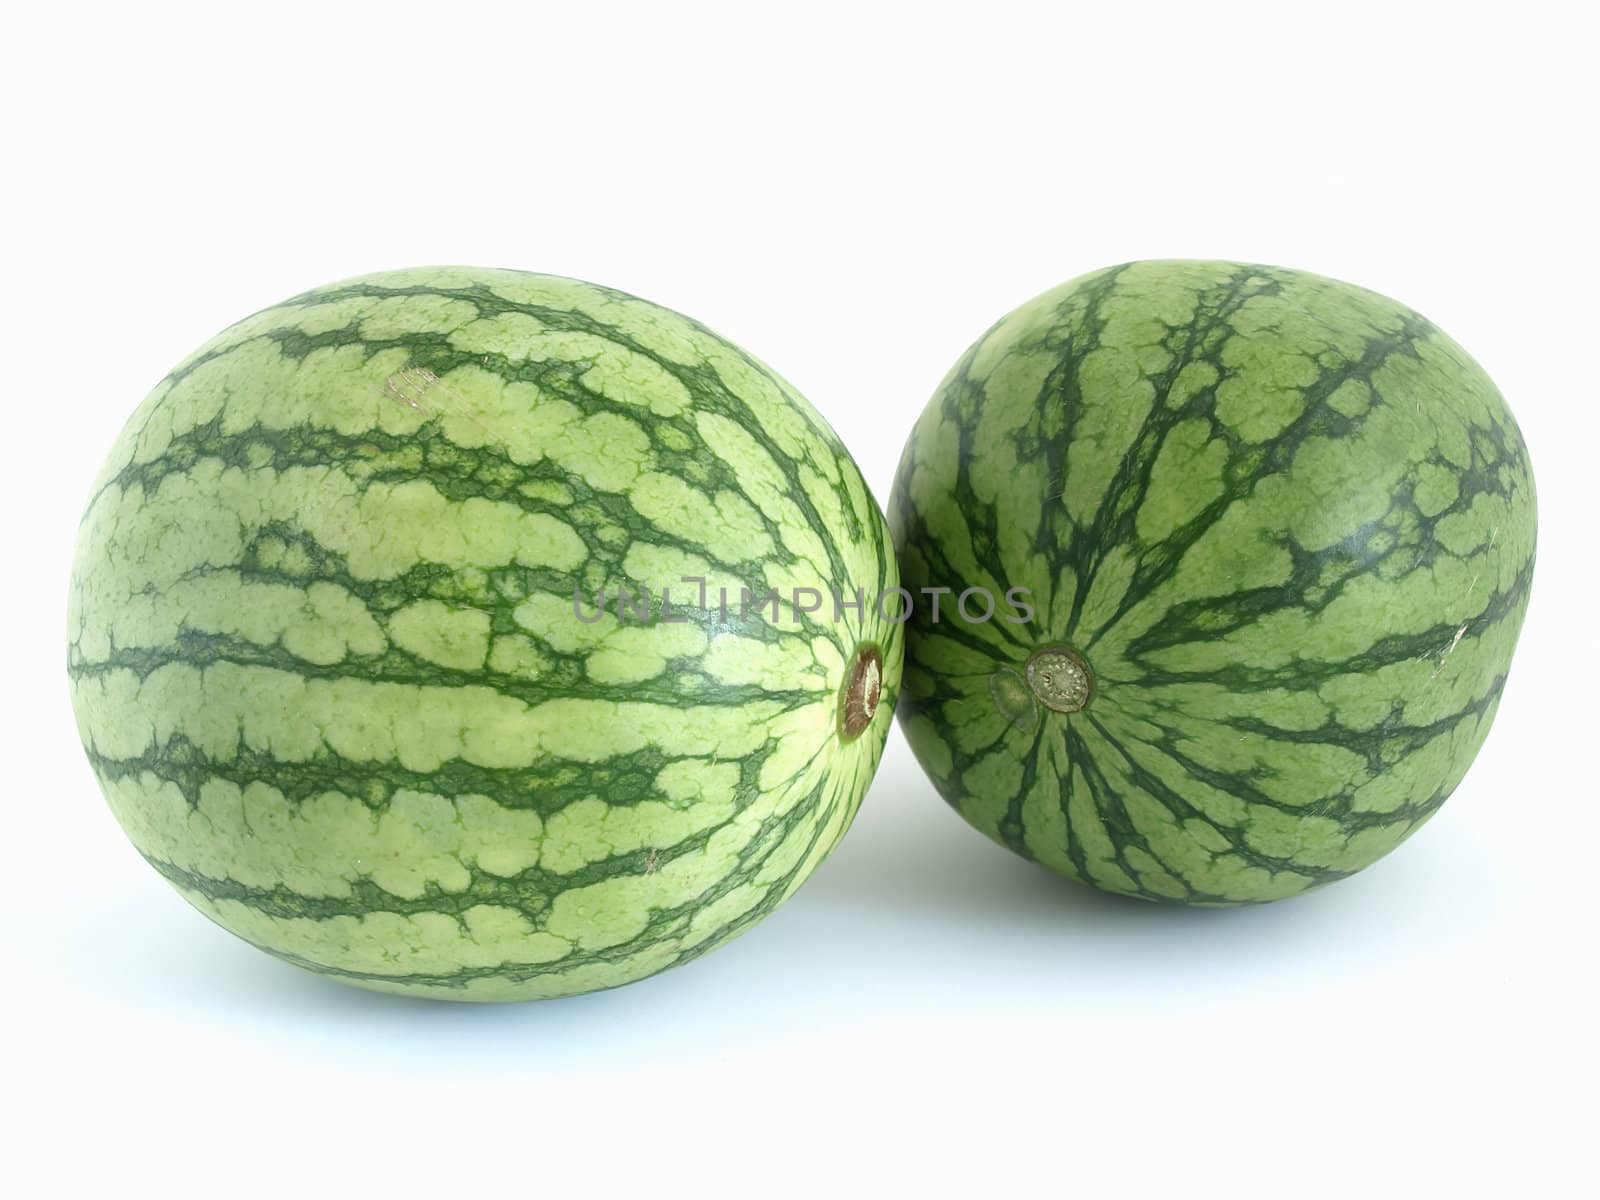 Two isolated green watermelons studio isolated against a white background.